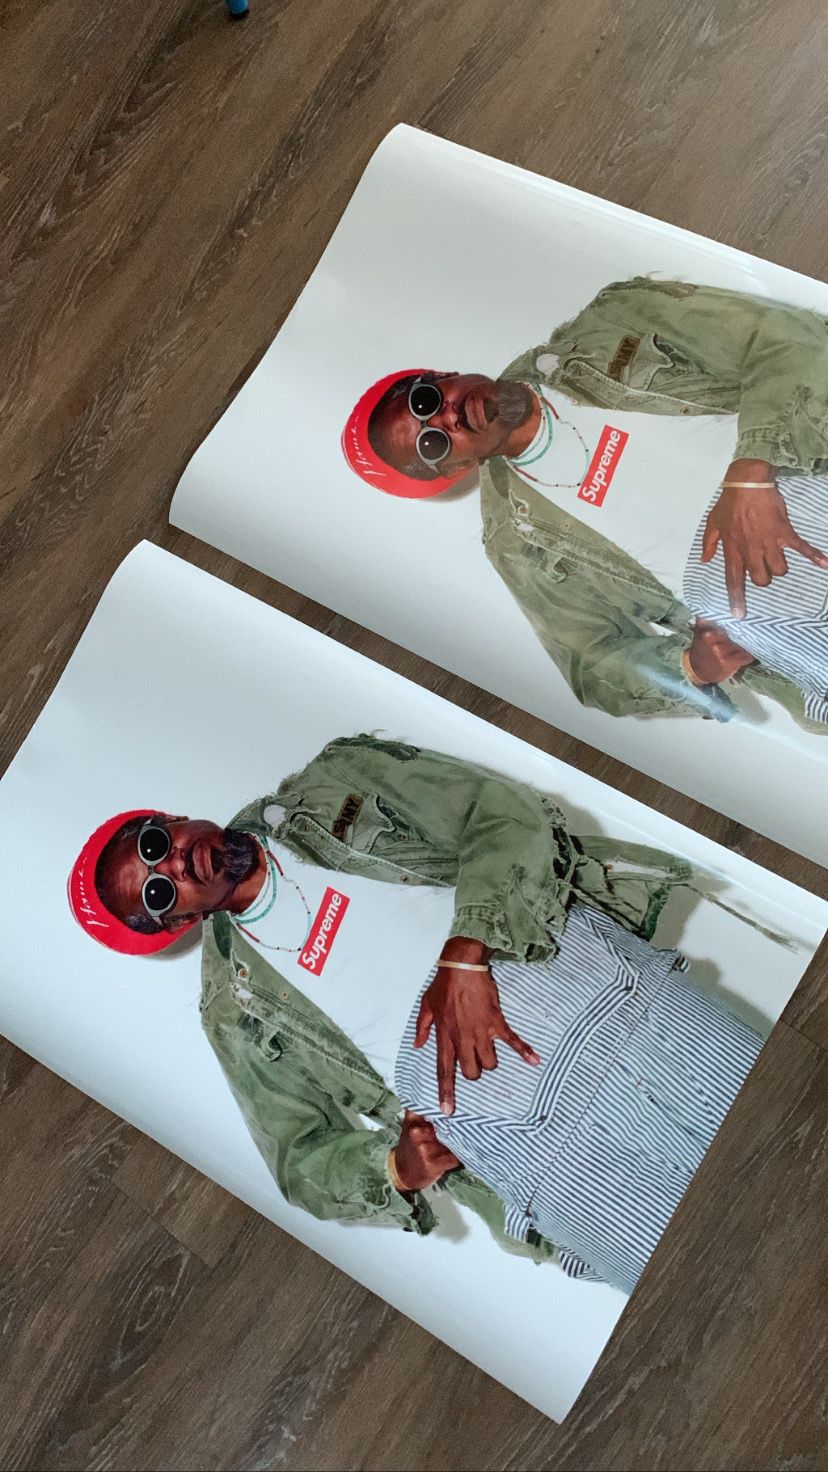 Supreme New York Andre 3000 Poster for Sale in Los Angeles, CA